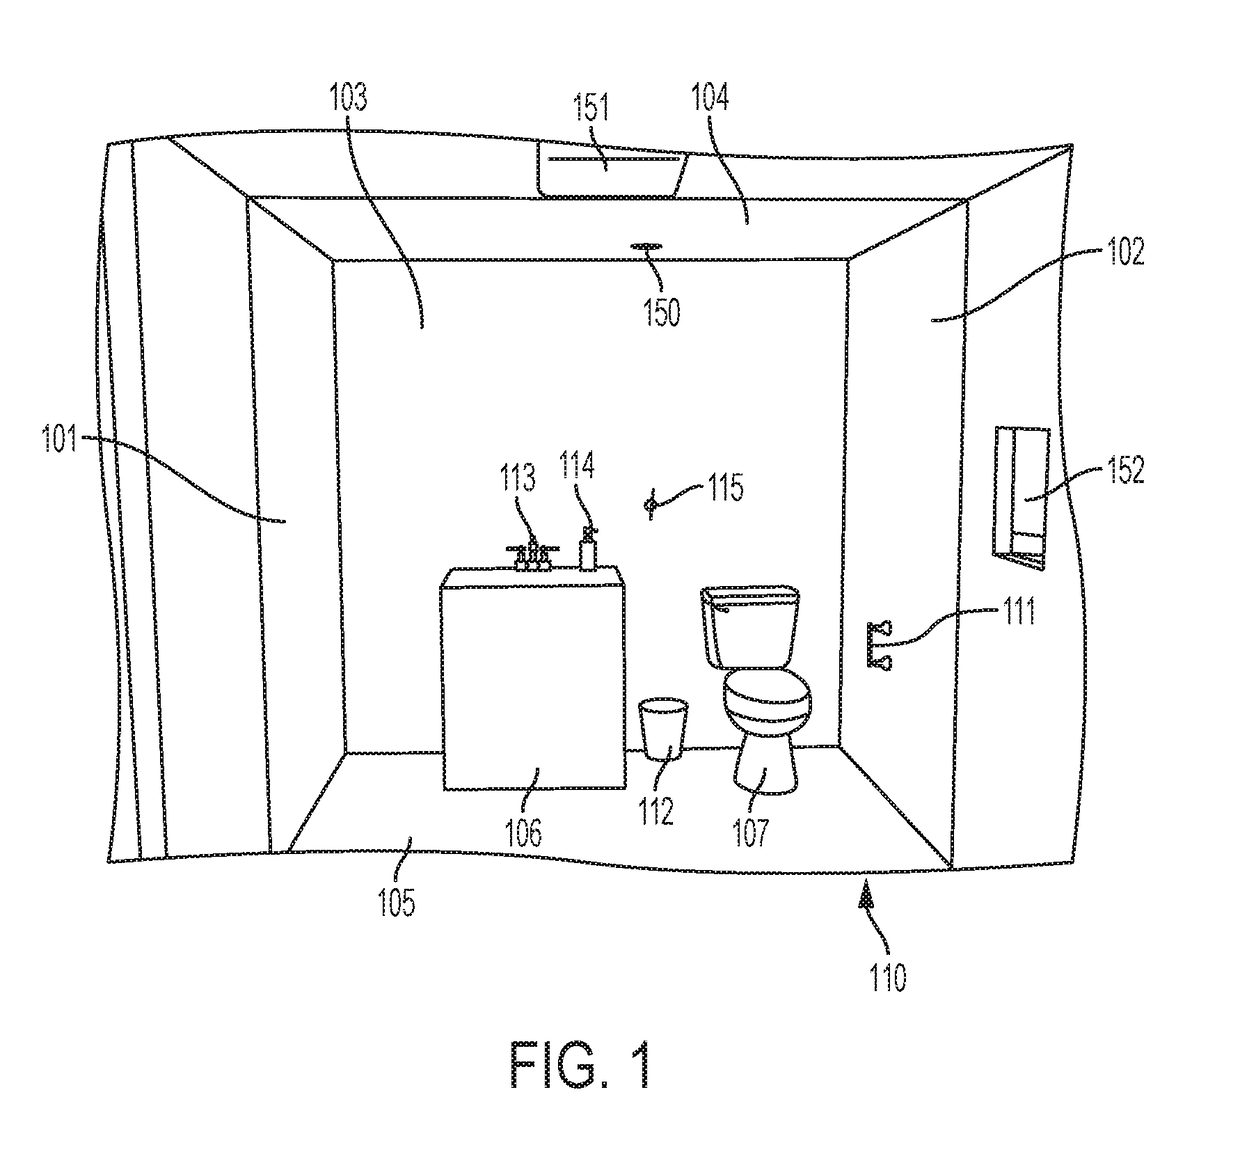 Systems and Methods for Displaying a Simulated Room and Portions Thereof